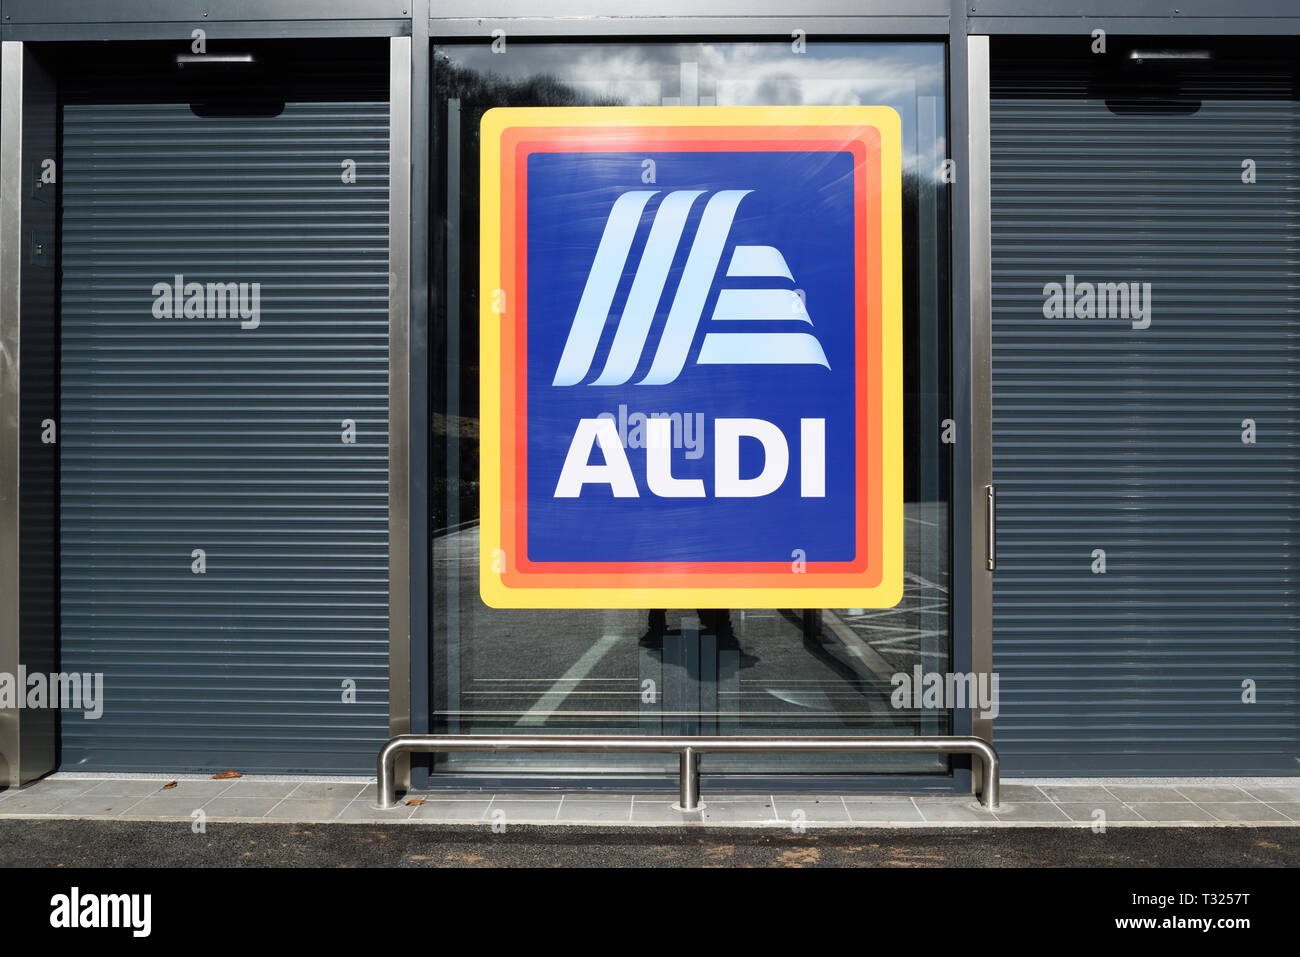 New Aldi Sign High Resolution Stock Photography and Images - Alamy